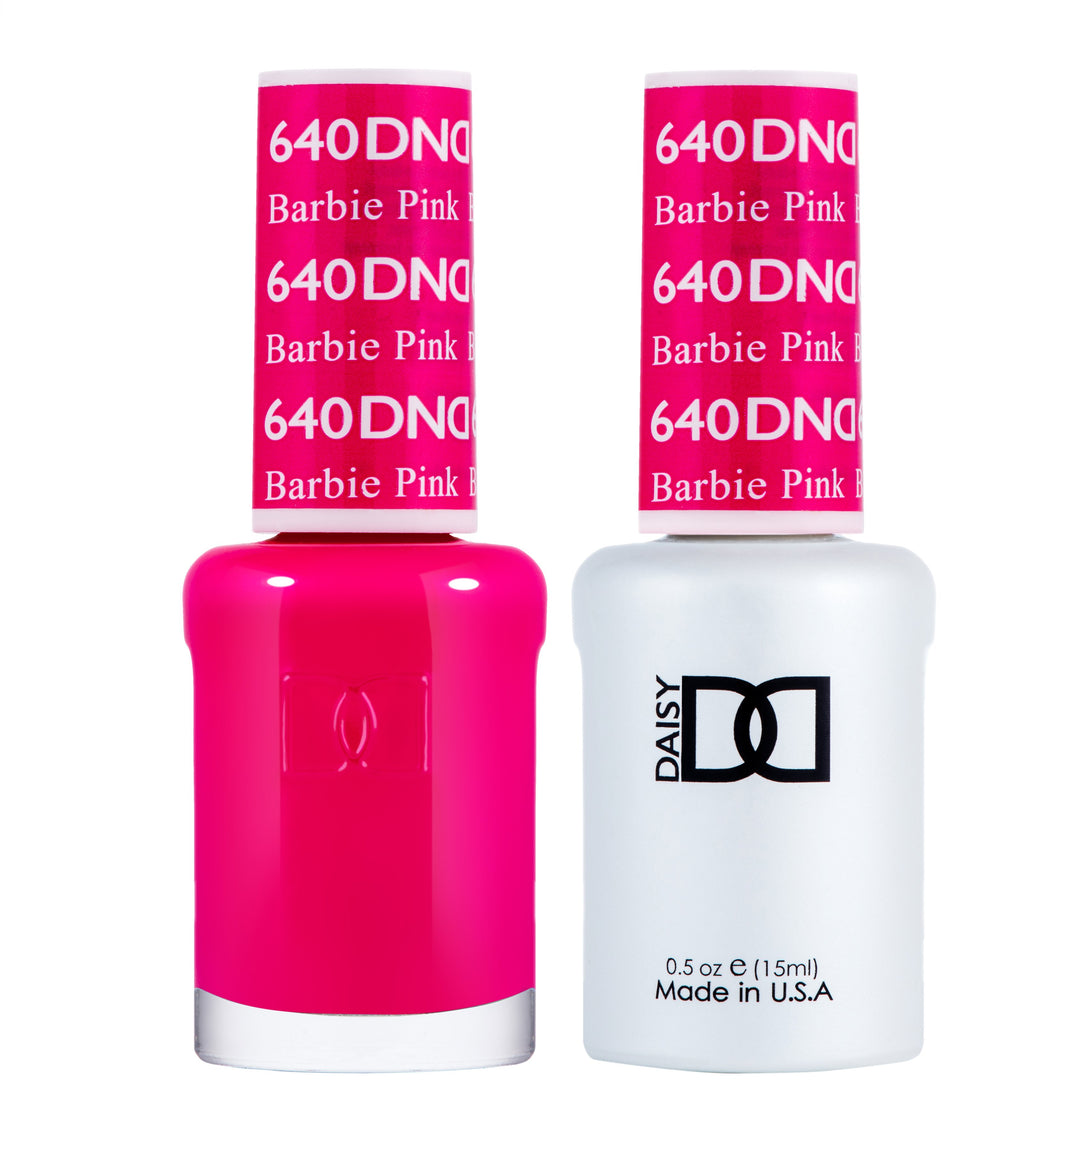 DND DUO Nail Lacquer and UV|LED Gel Polish Barbie Pink 640 (2 x 15ml)